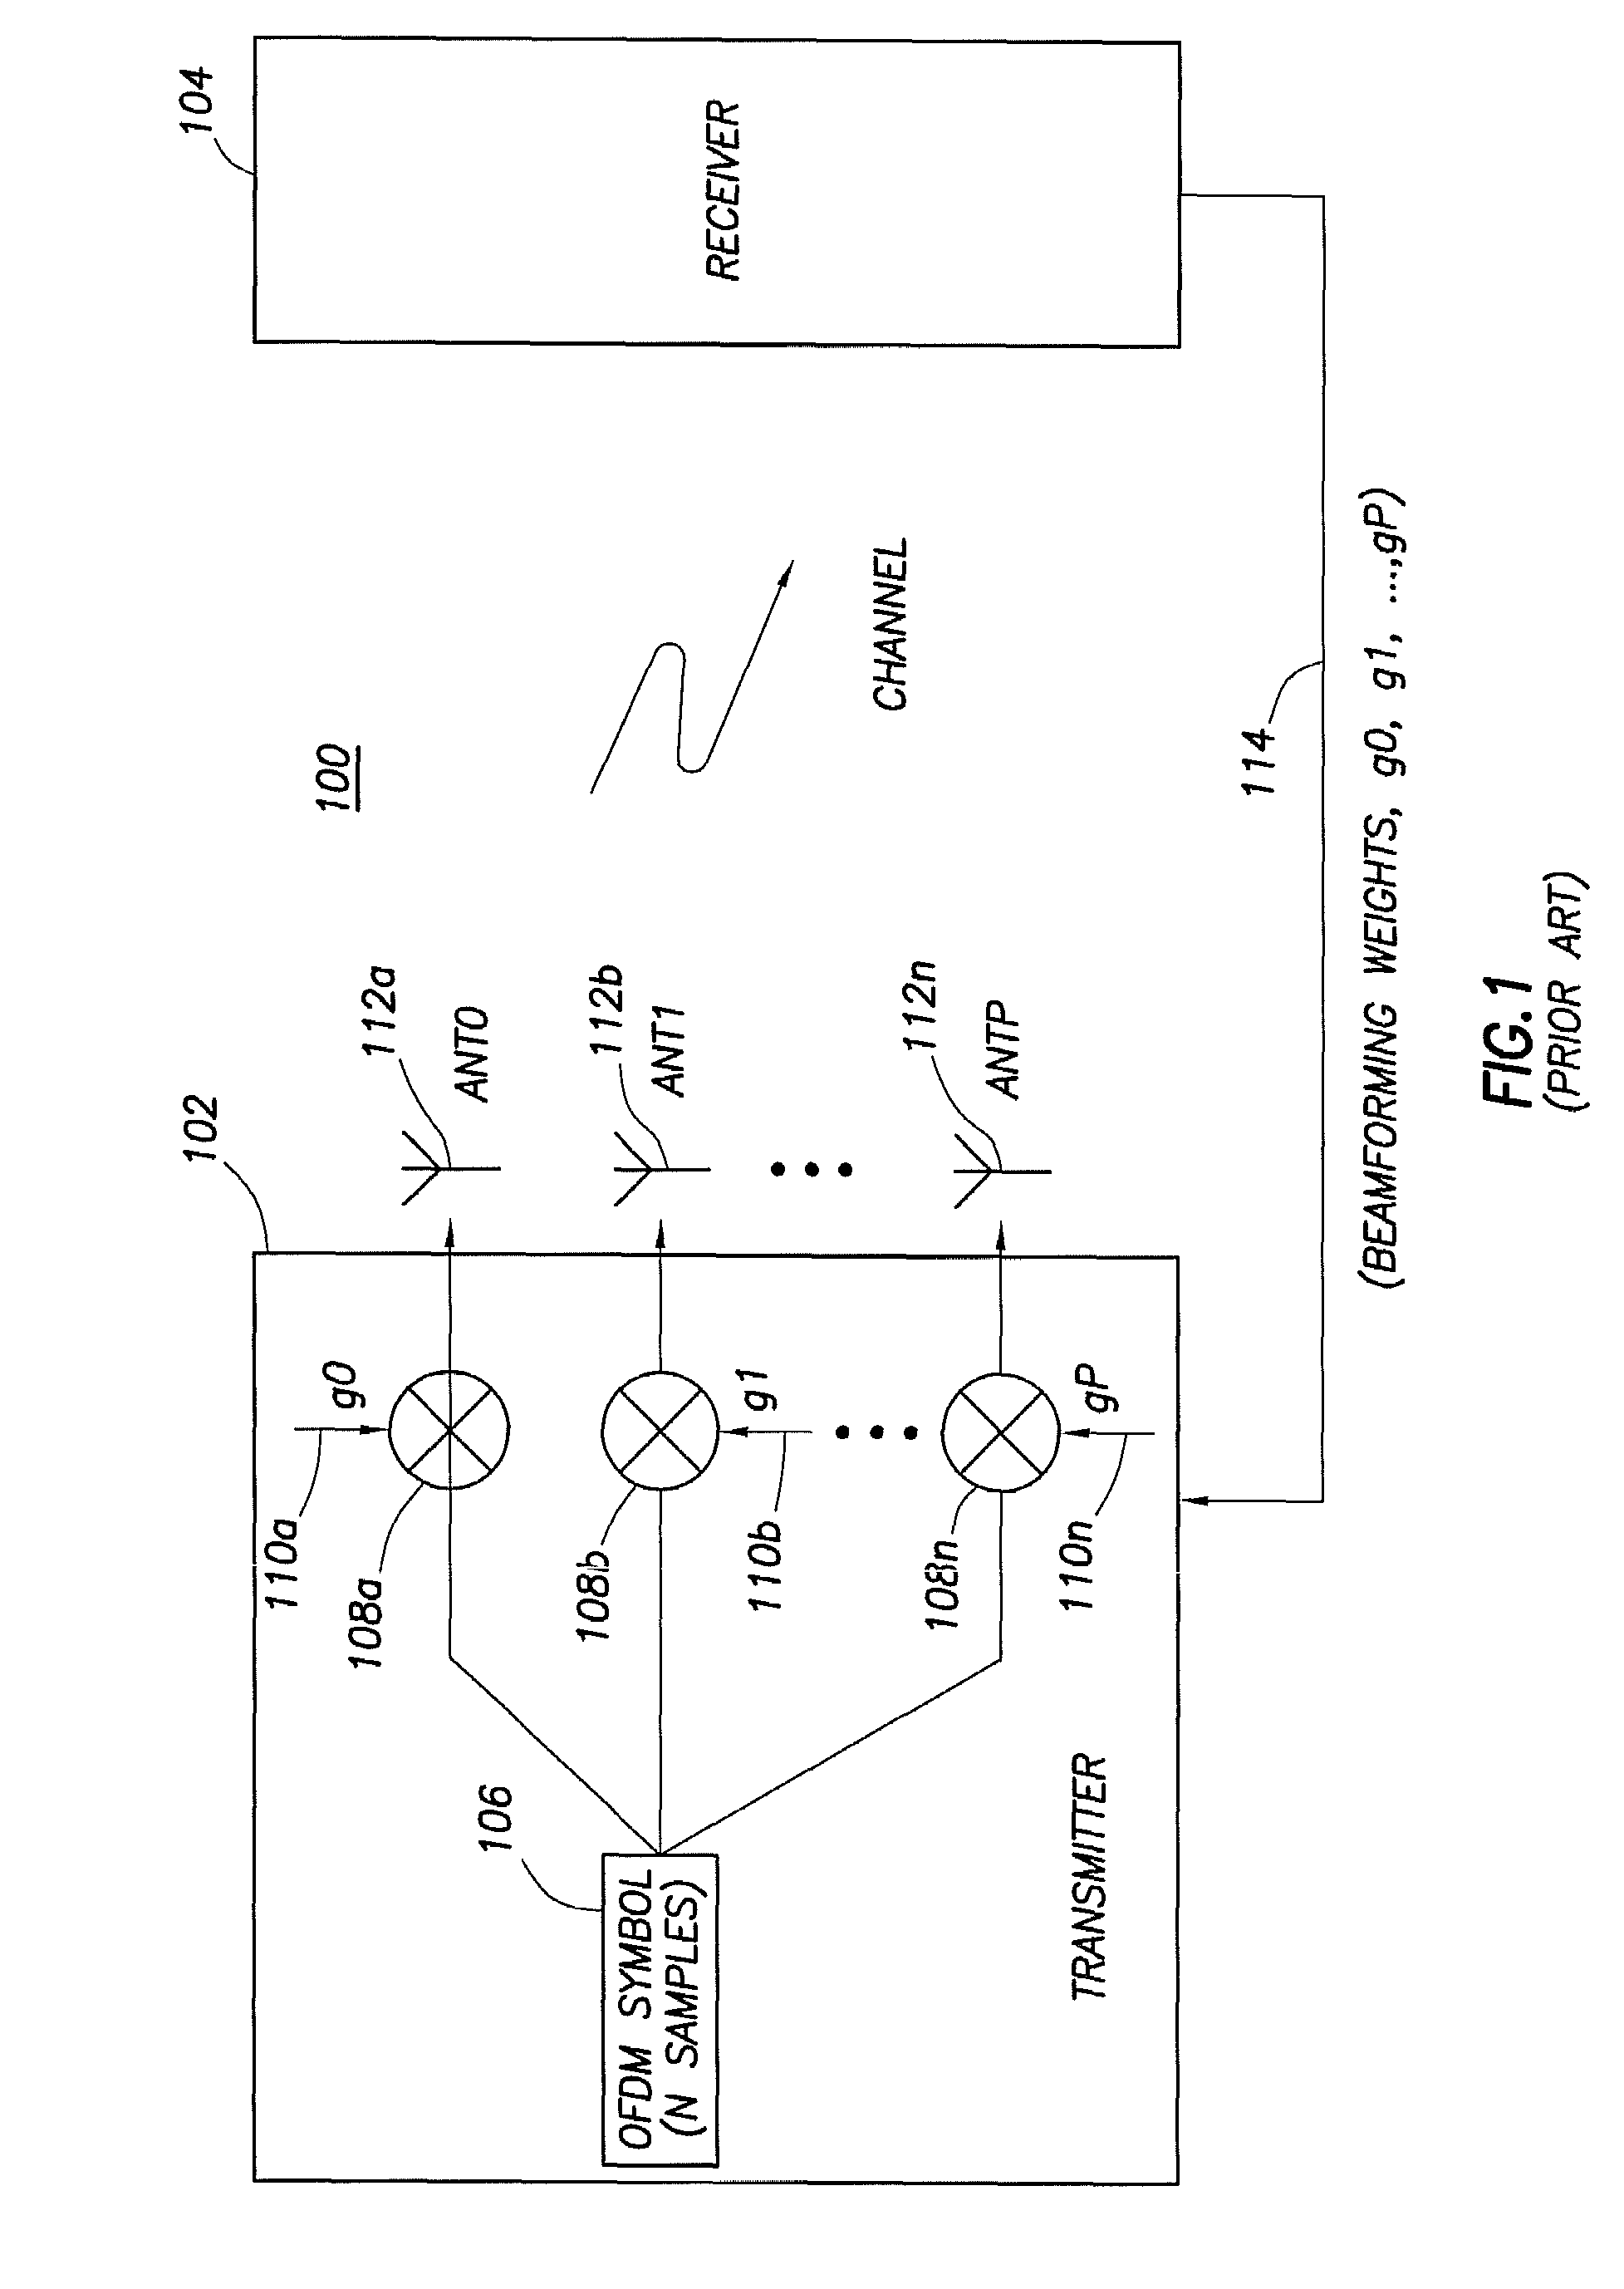 System and method for enhancing the performance of wireless communication systems